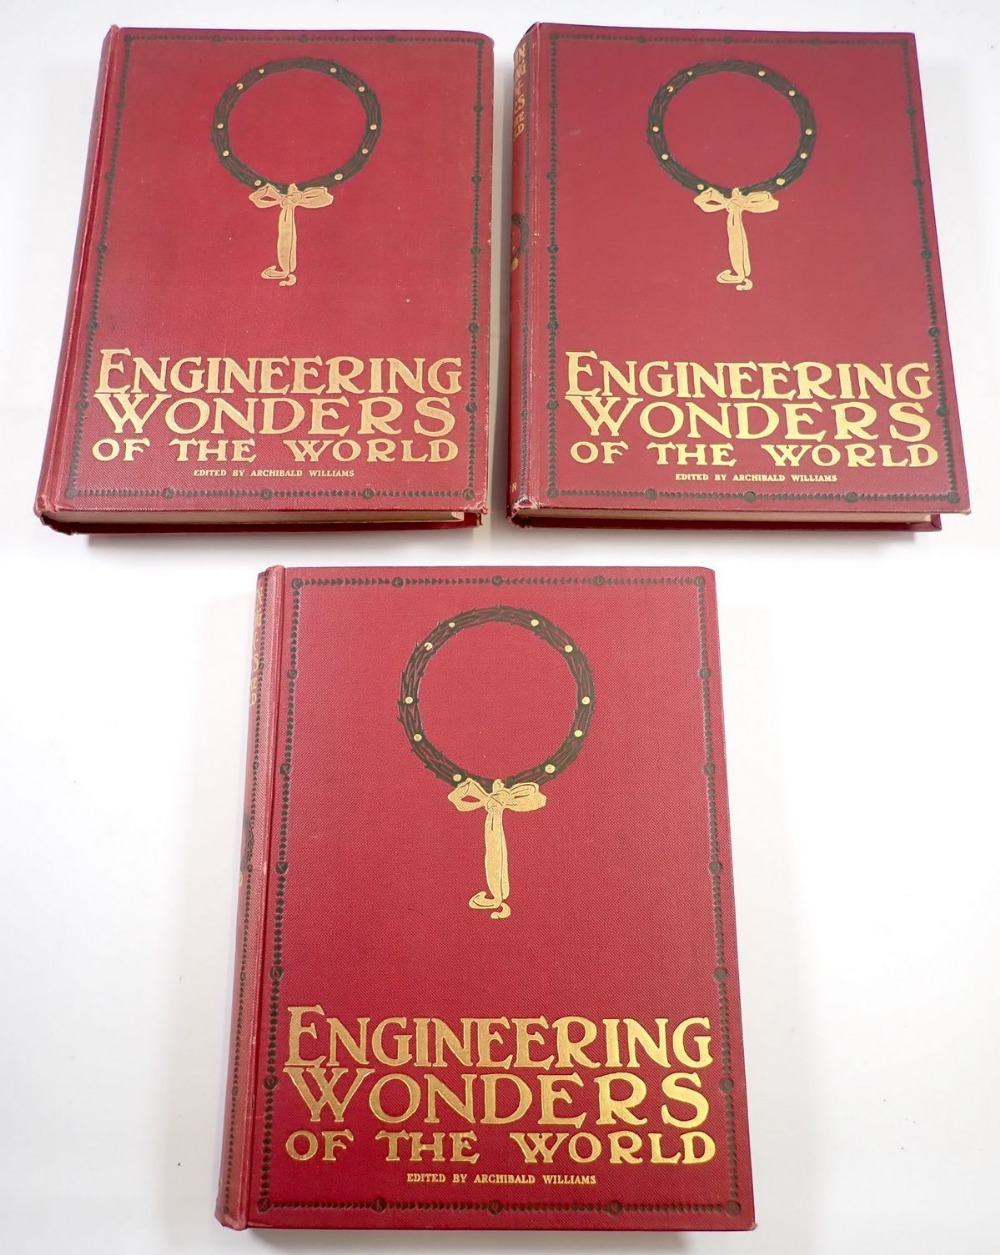 Engineering Wonders of the World by Archibald Williams, three volumes